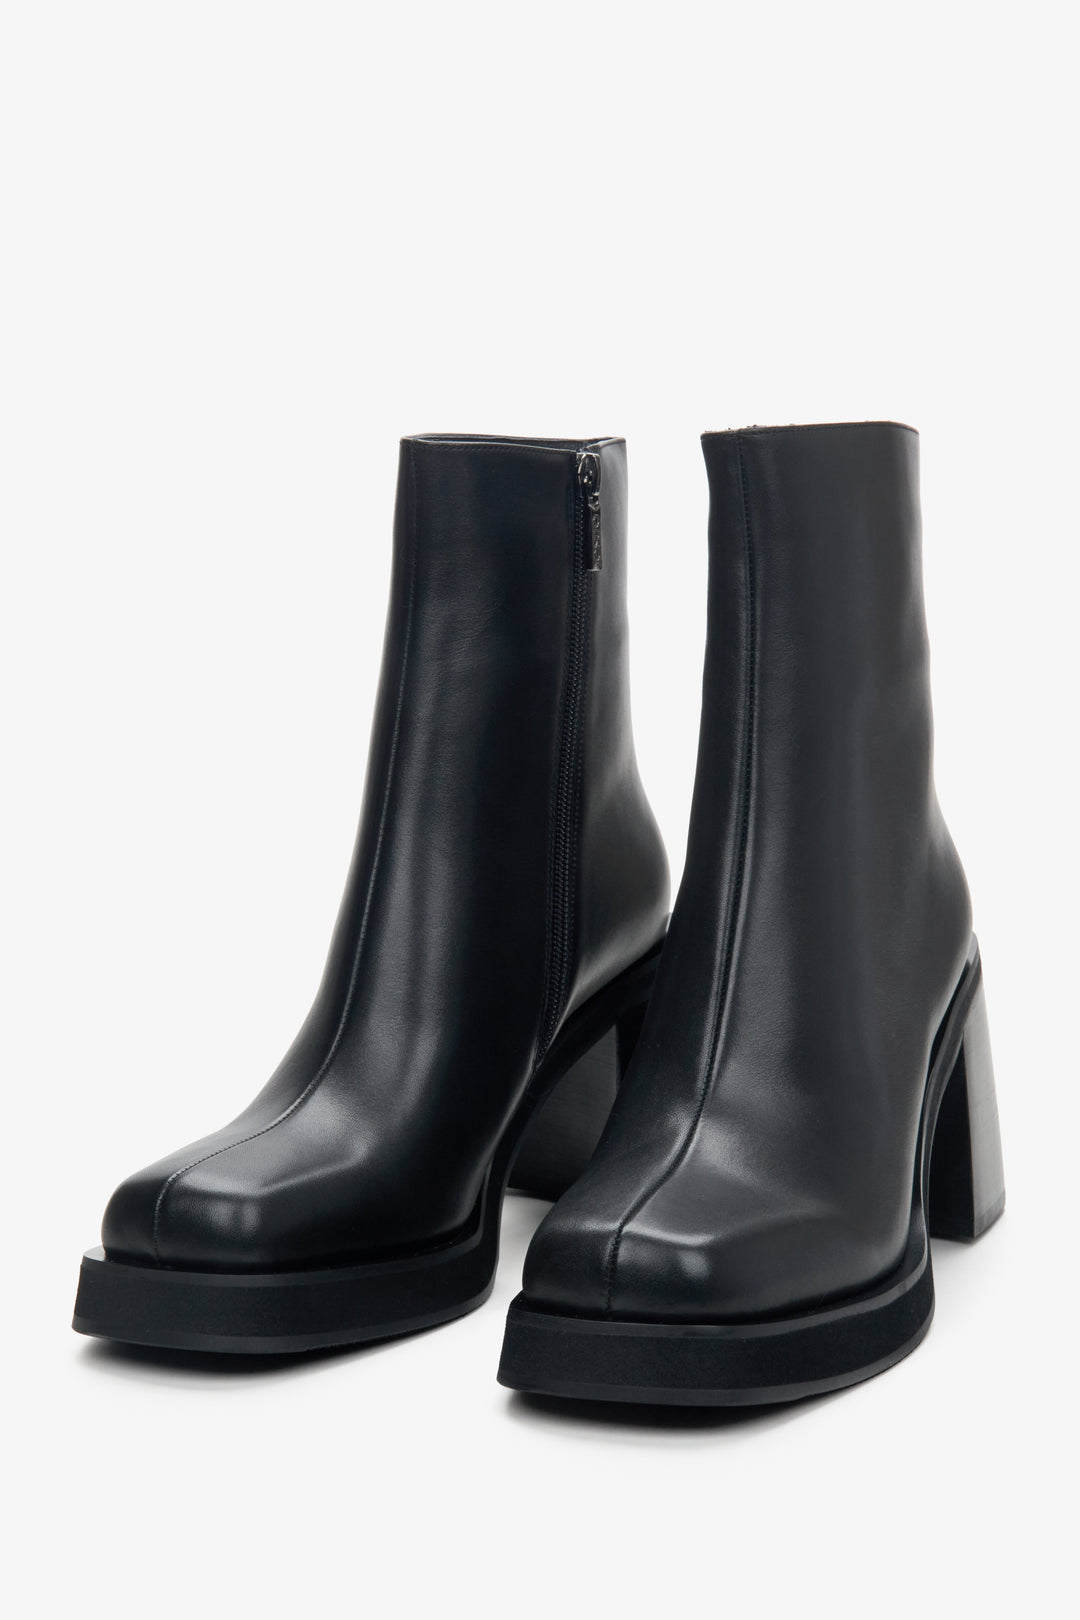 Women's high-heeled boots by Estro in black - close-up on the toe.